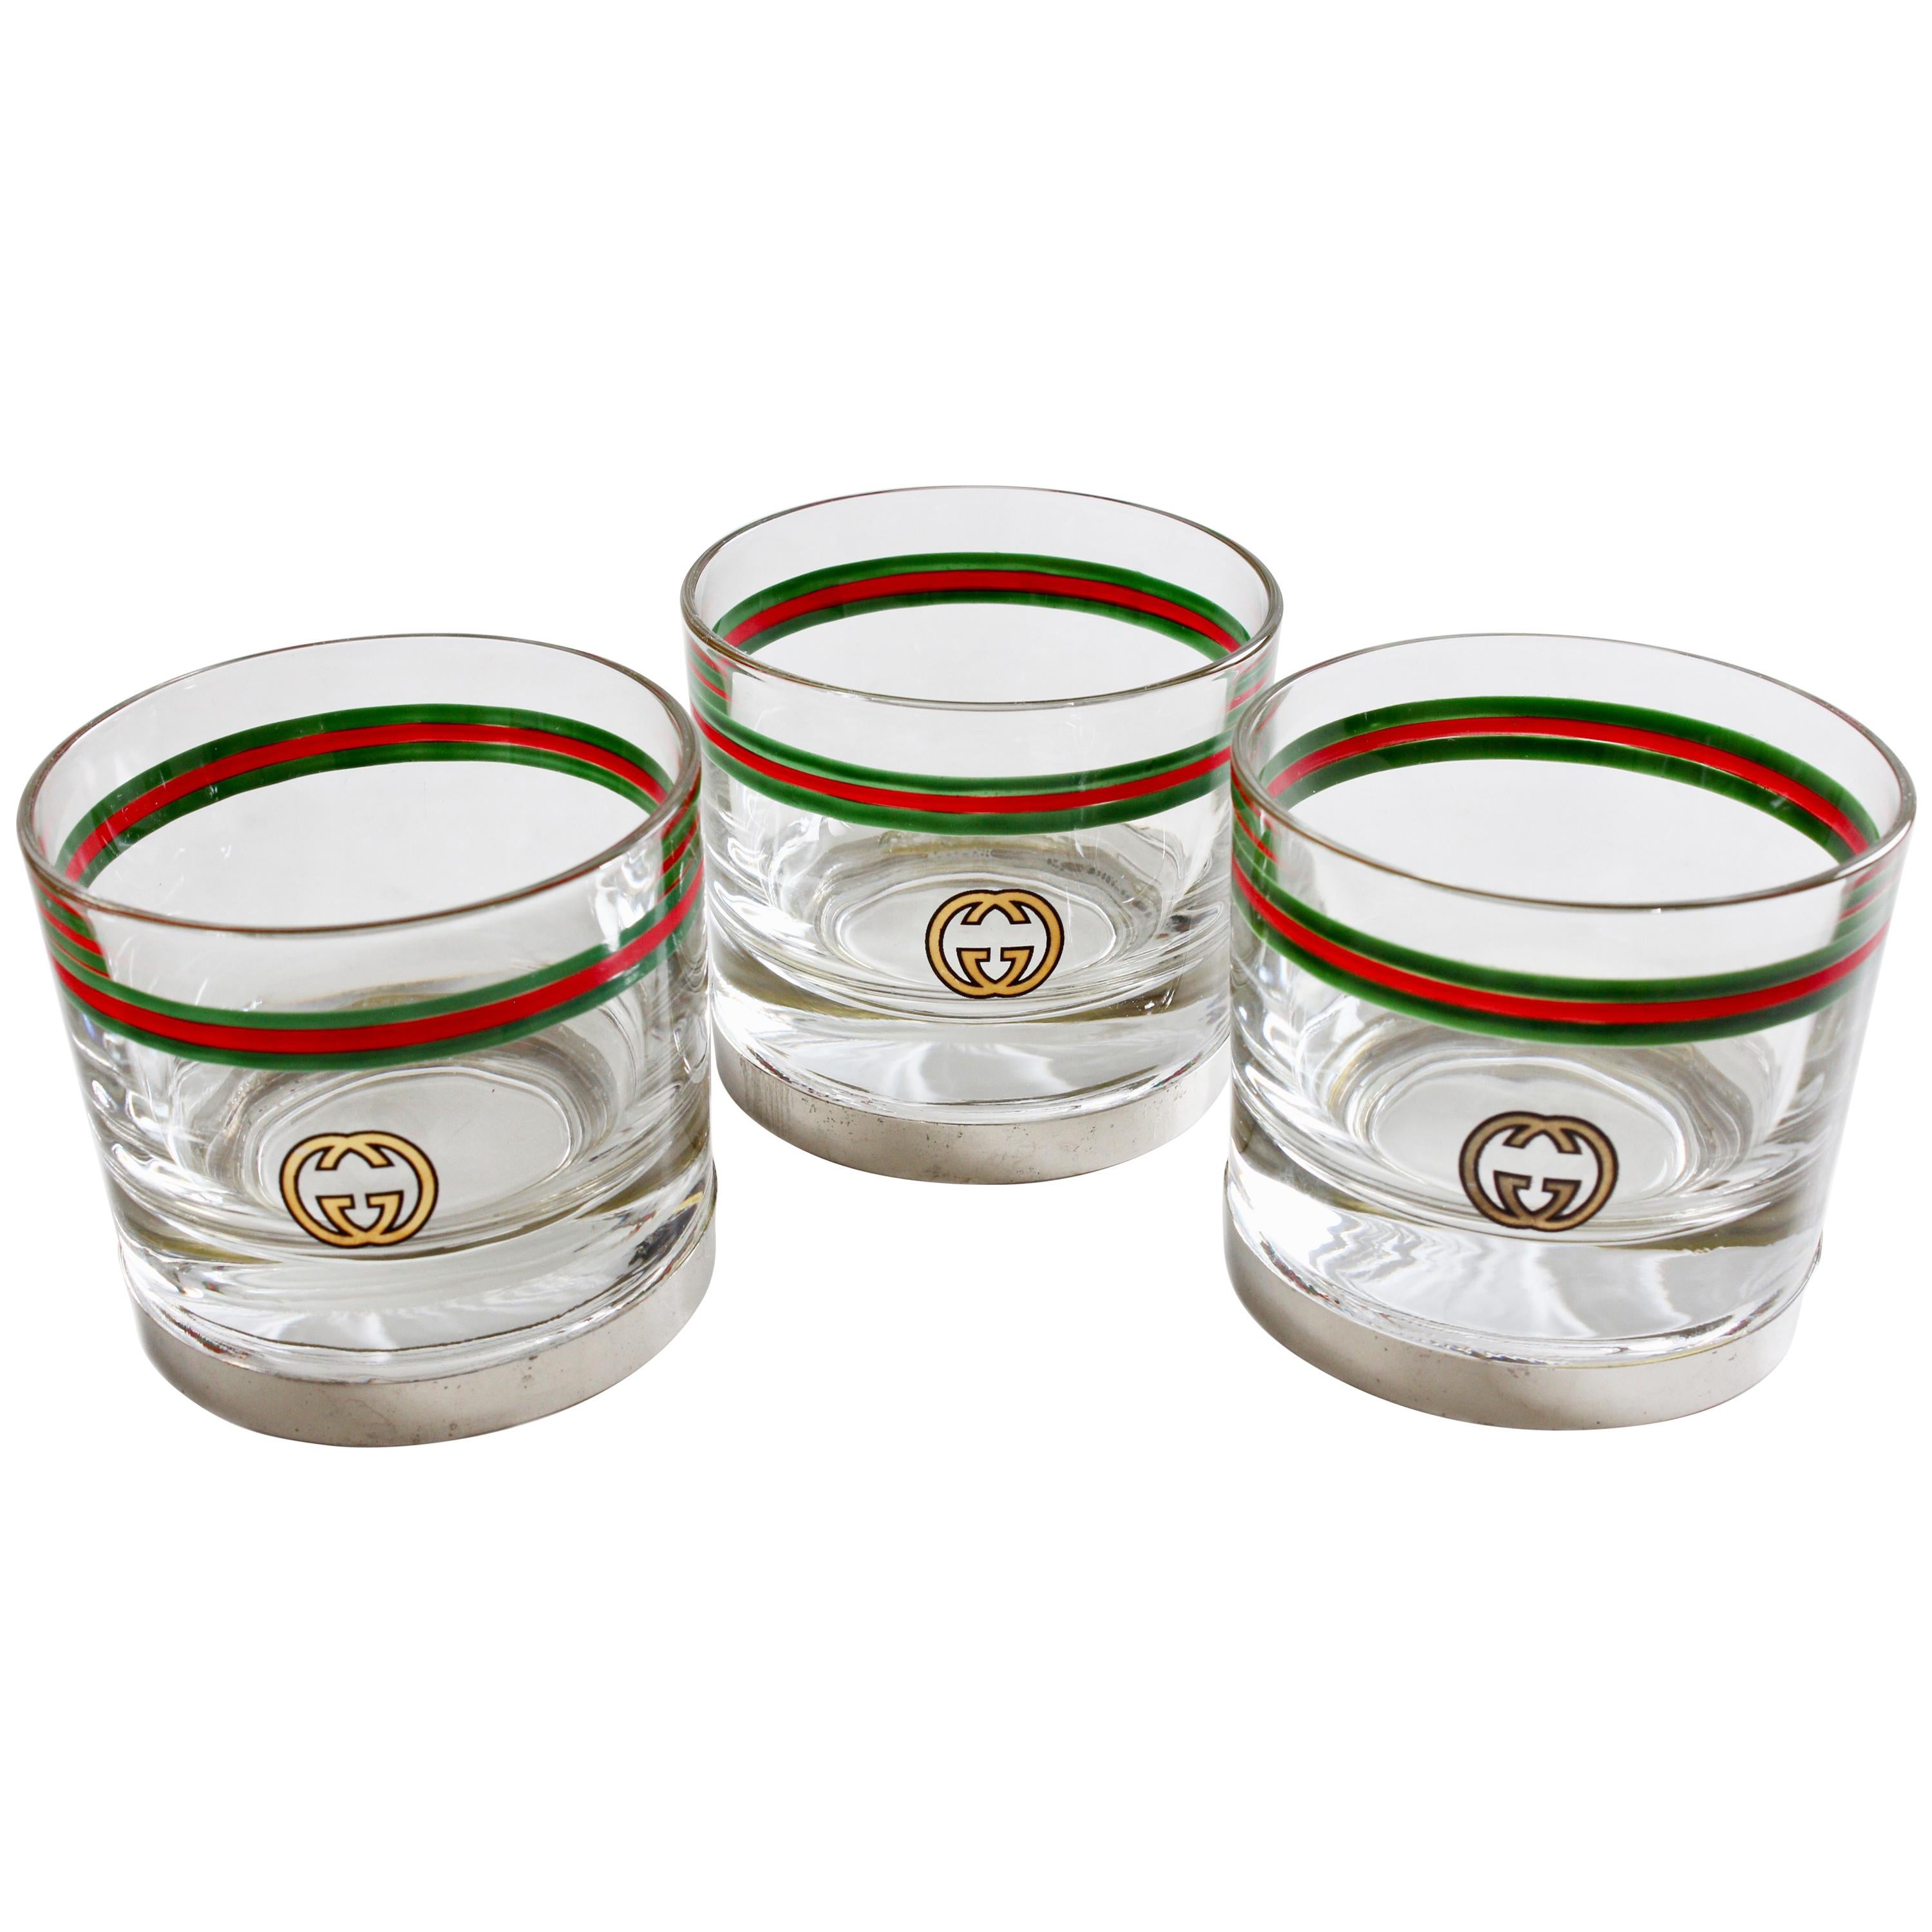 Rare Gucci Cocktail Glasses Barware Set of 3 with Silver Base Vintage 70s 